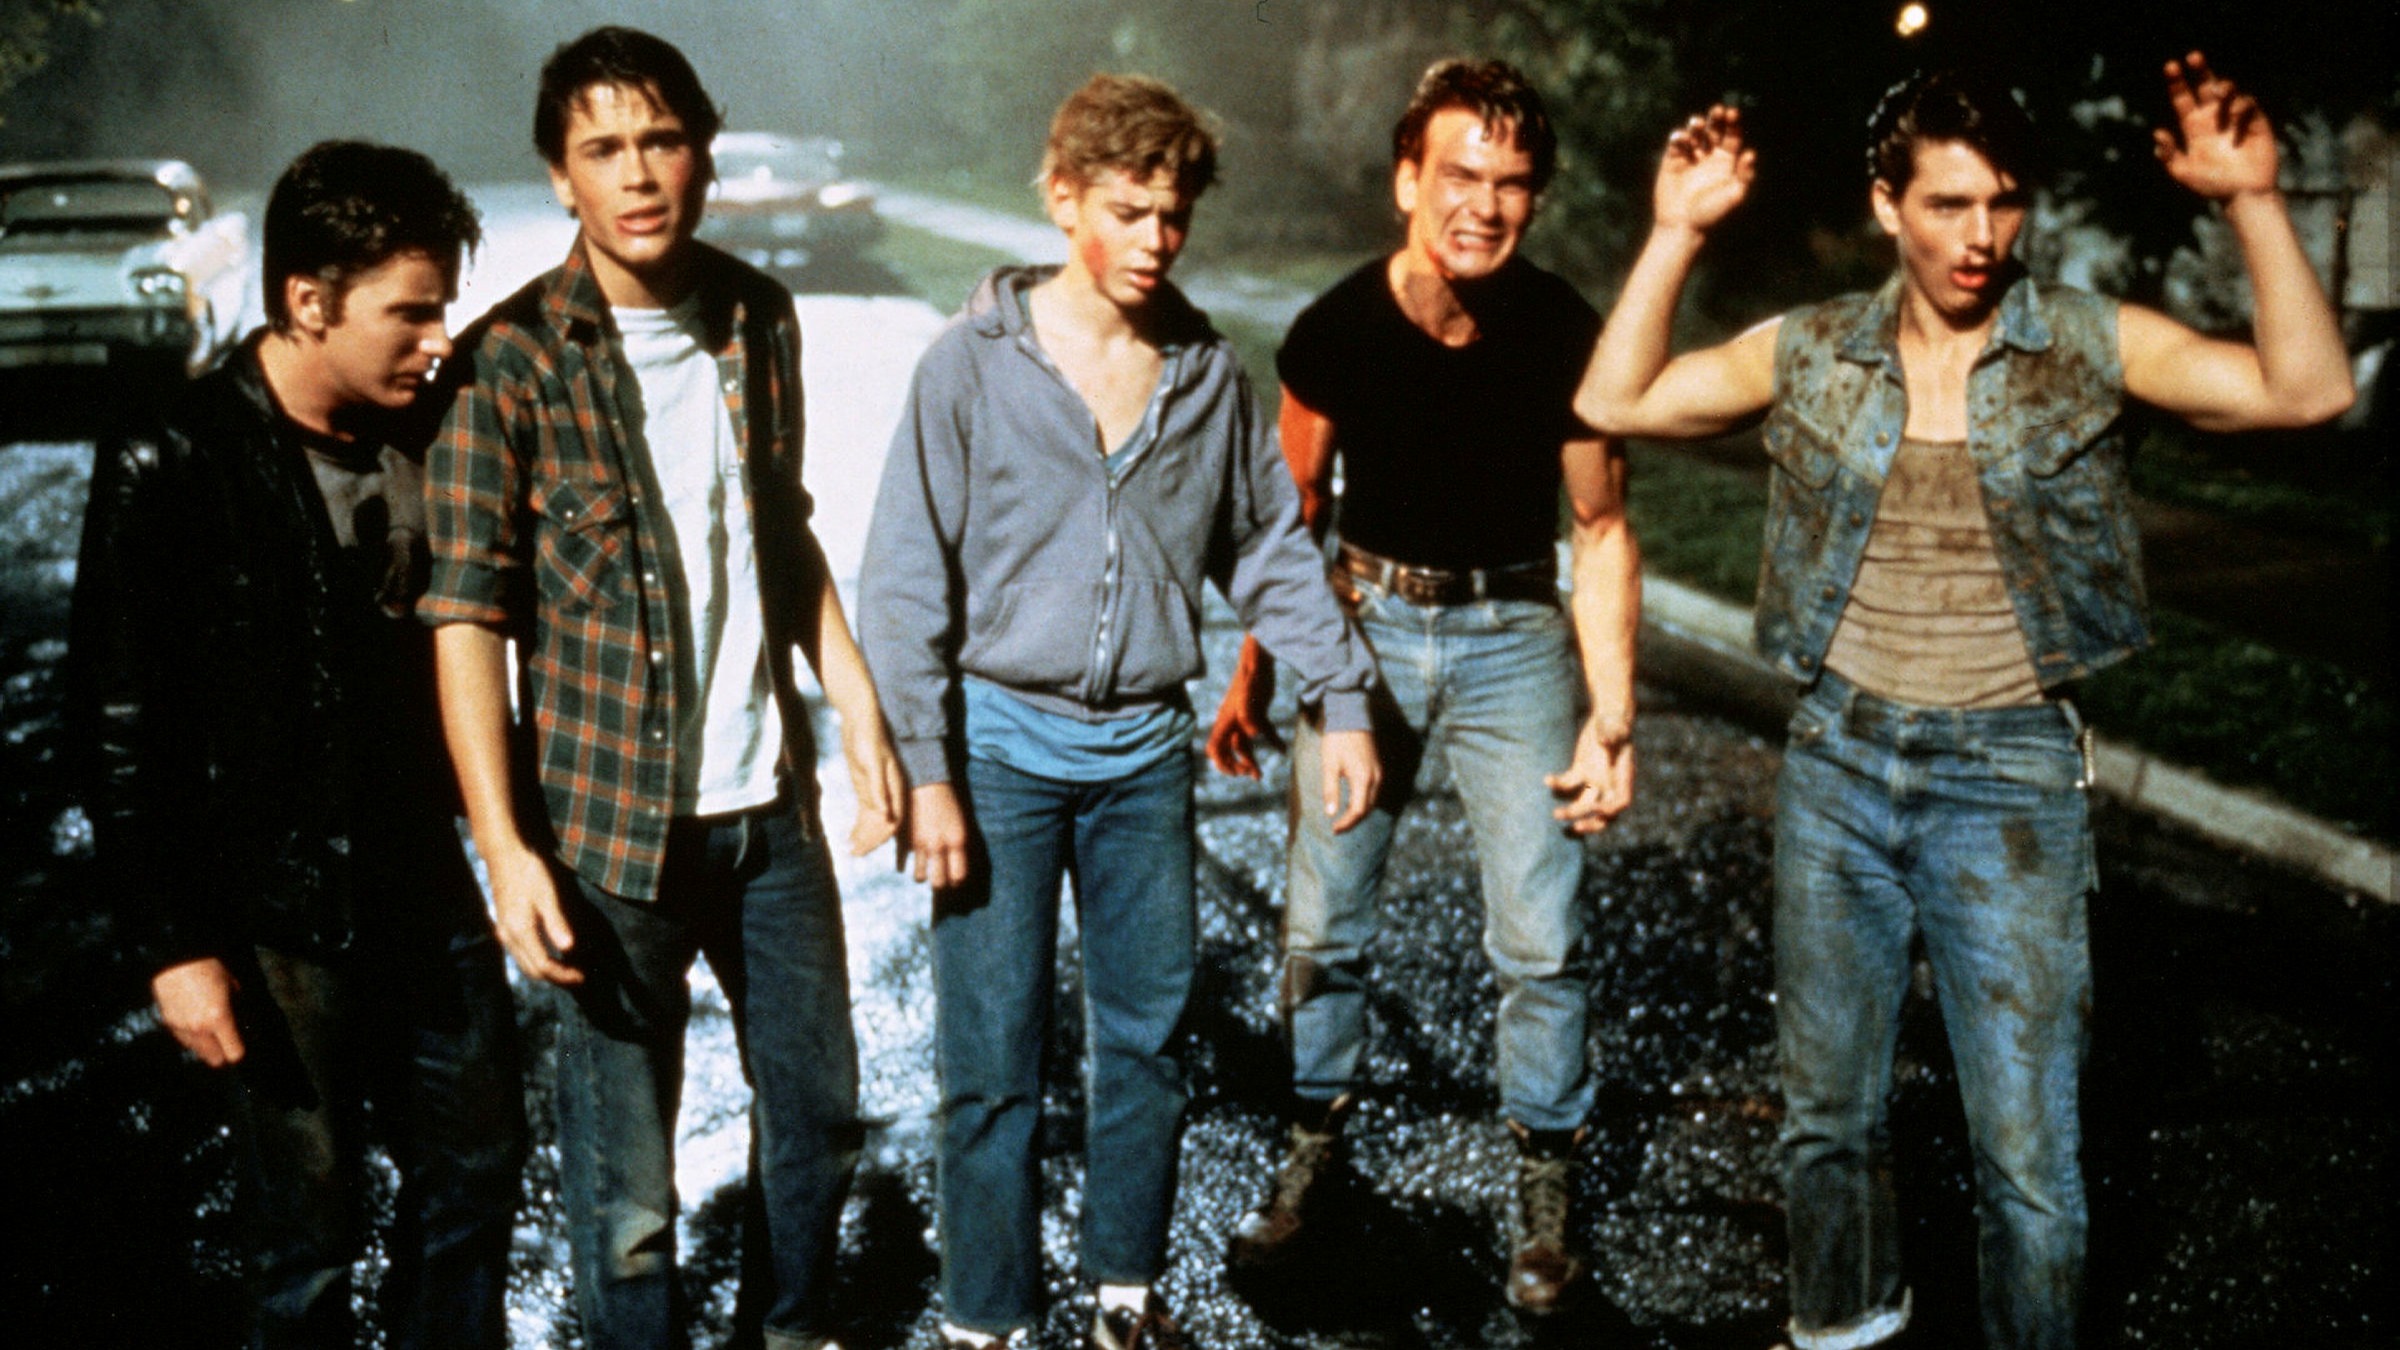 The Outsiders — '60s teen gangs seen through '80s eyes | Financial Times